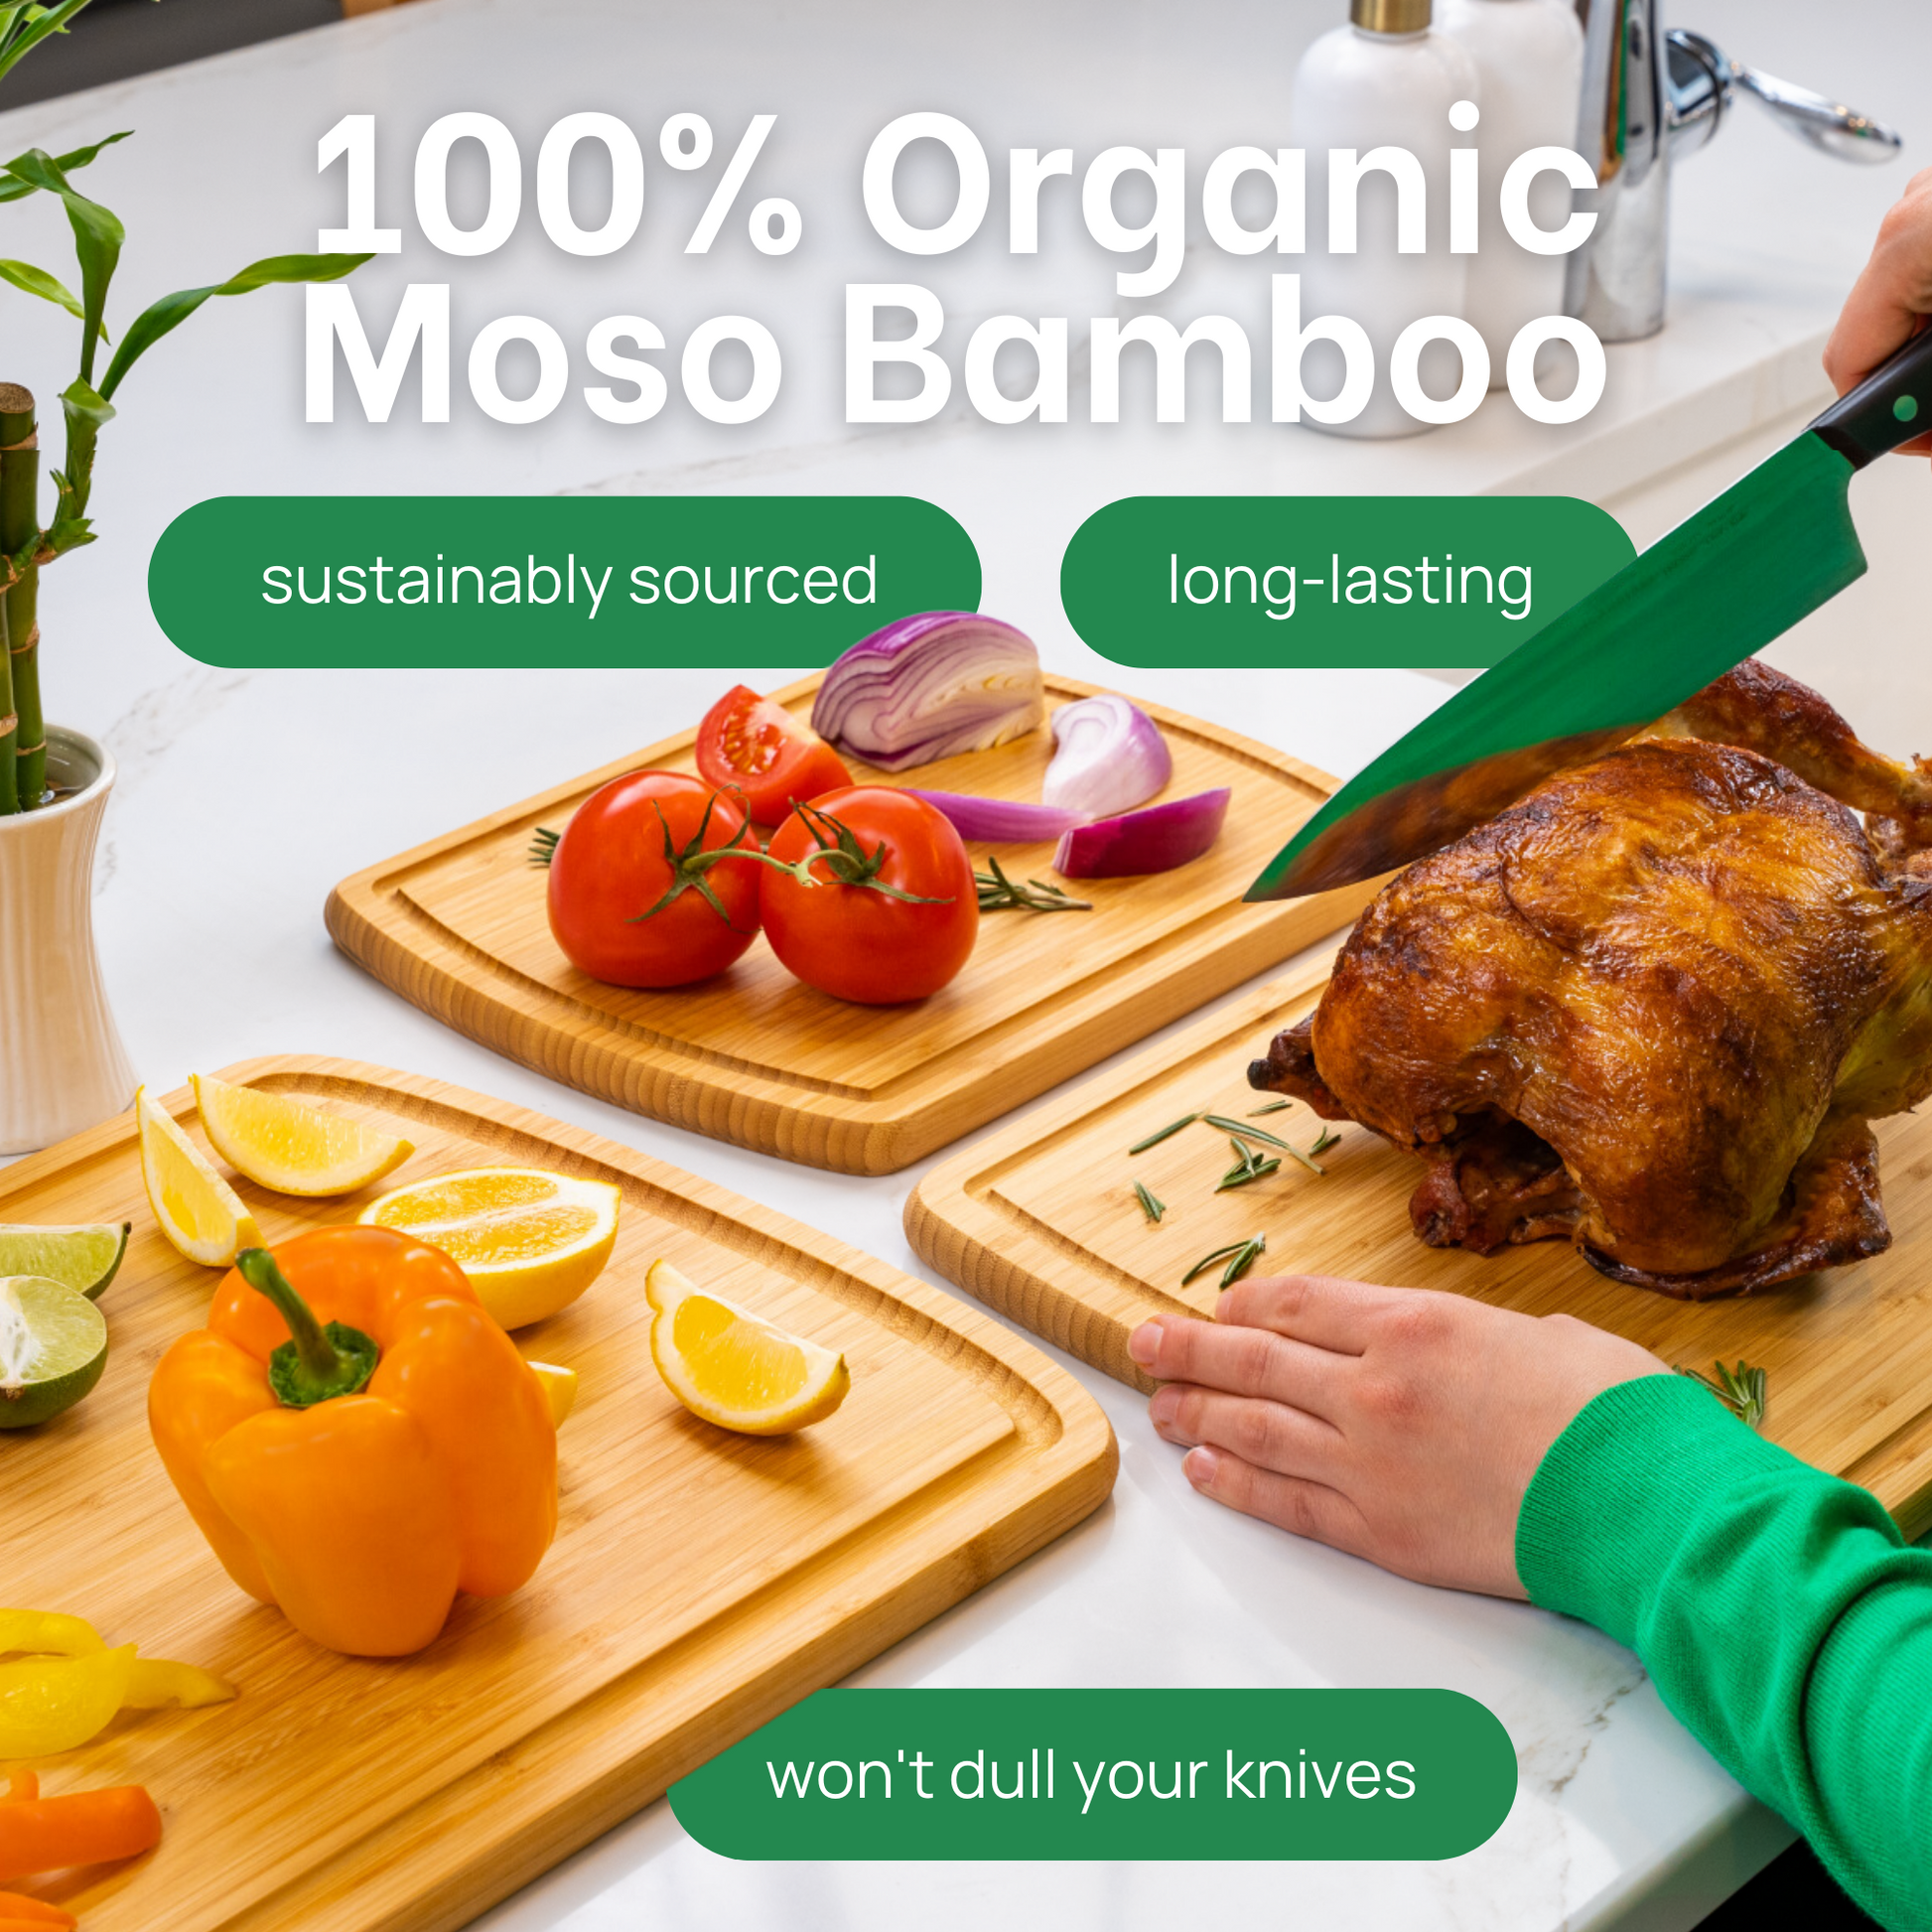 Organic Bamboo Cutting Boards for Kitchen Set of 3 - Eco-Friendly 100%  Natural Bamboo Wooden Chopping Board with Juice Groove for Food Prep, Meat